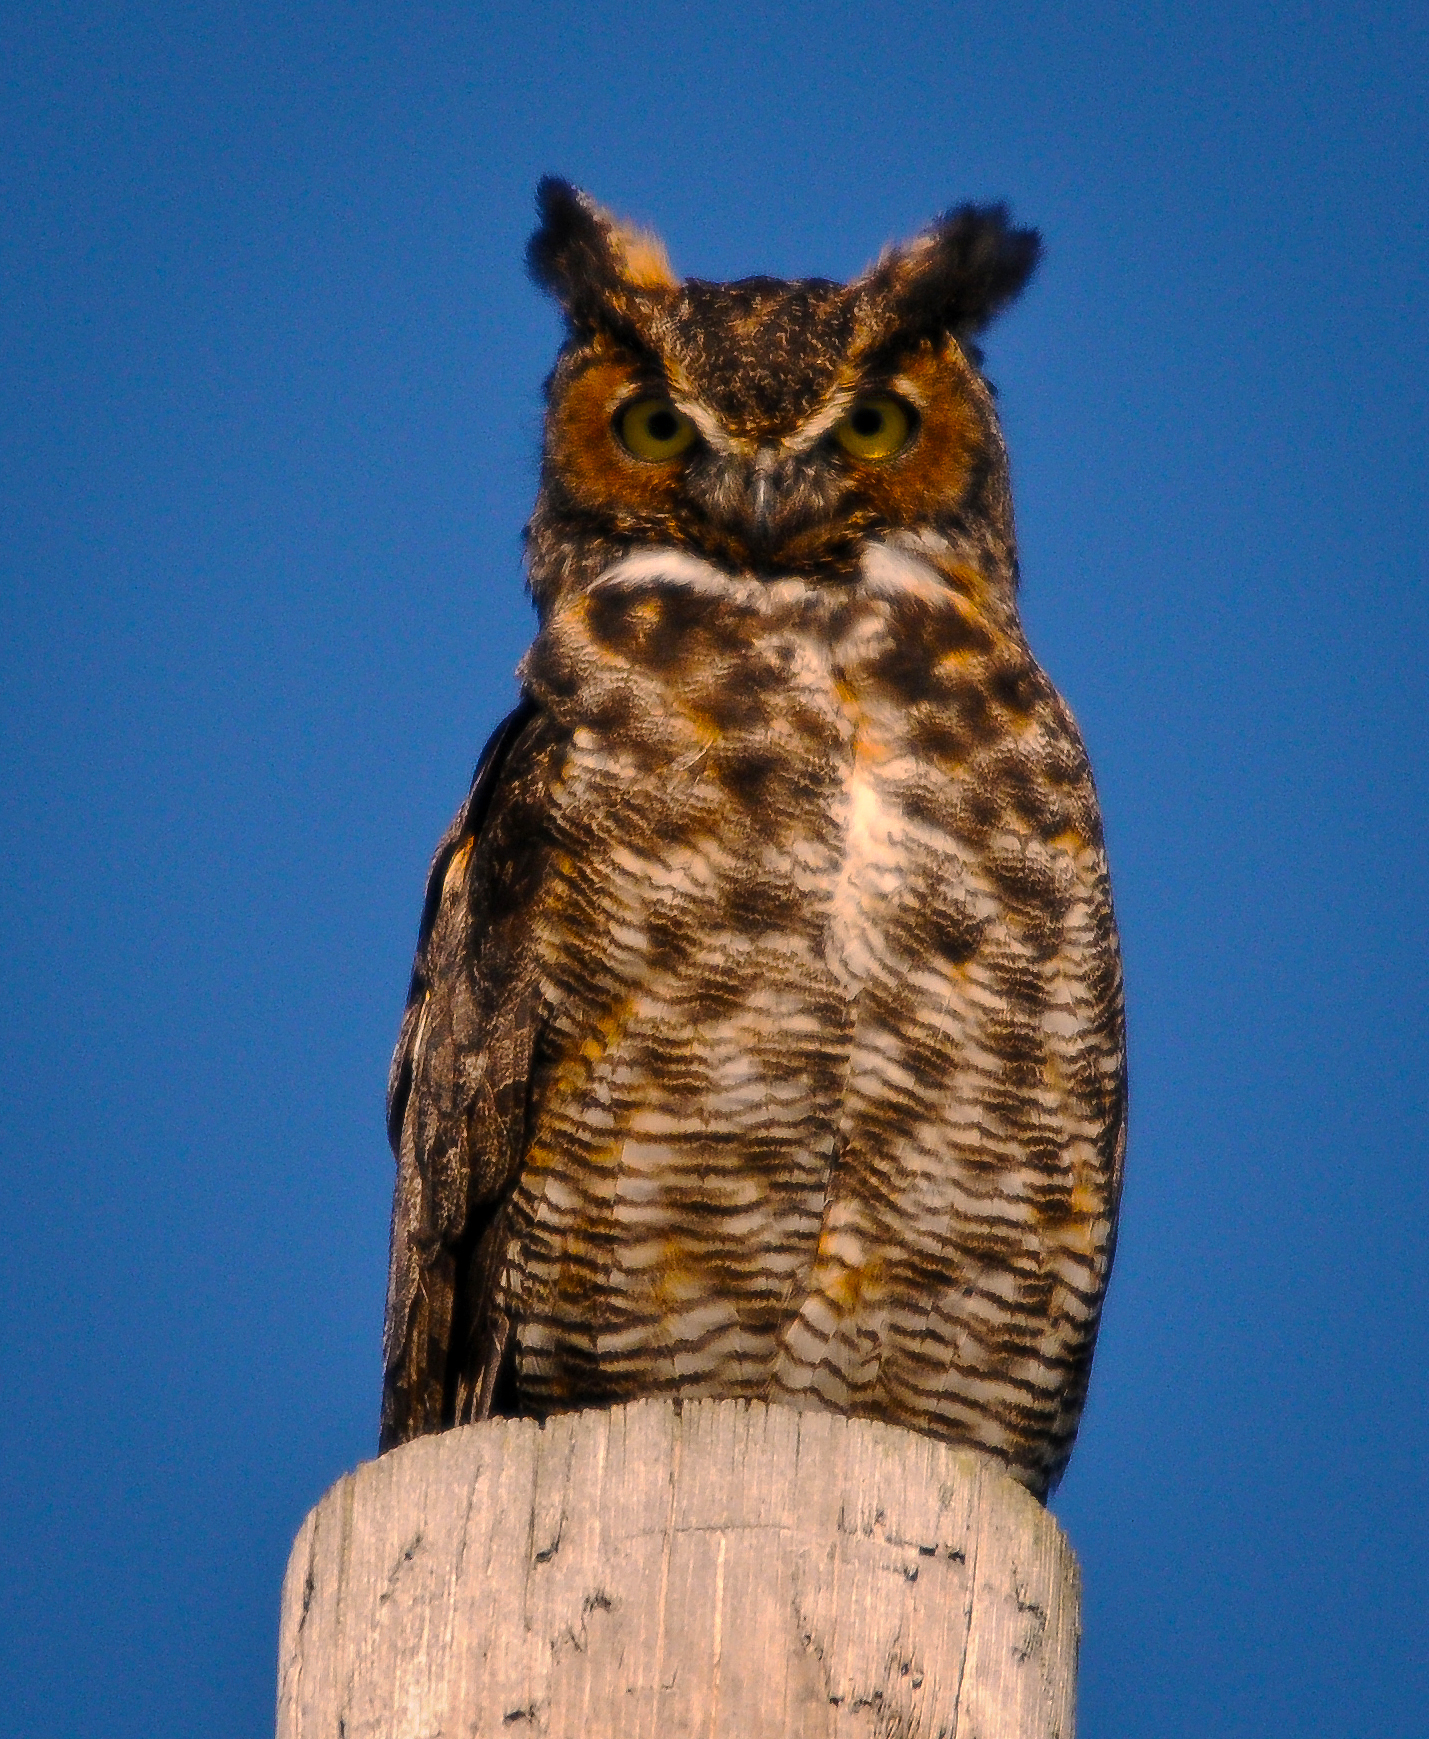 Great horned owl starts courting in fall